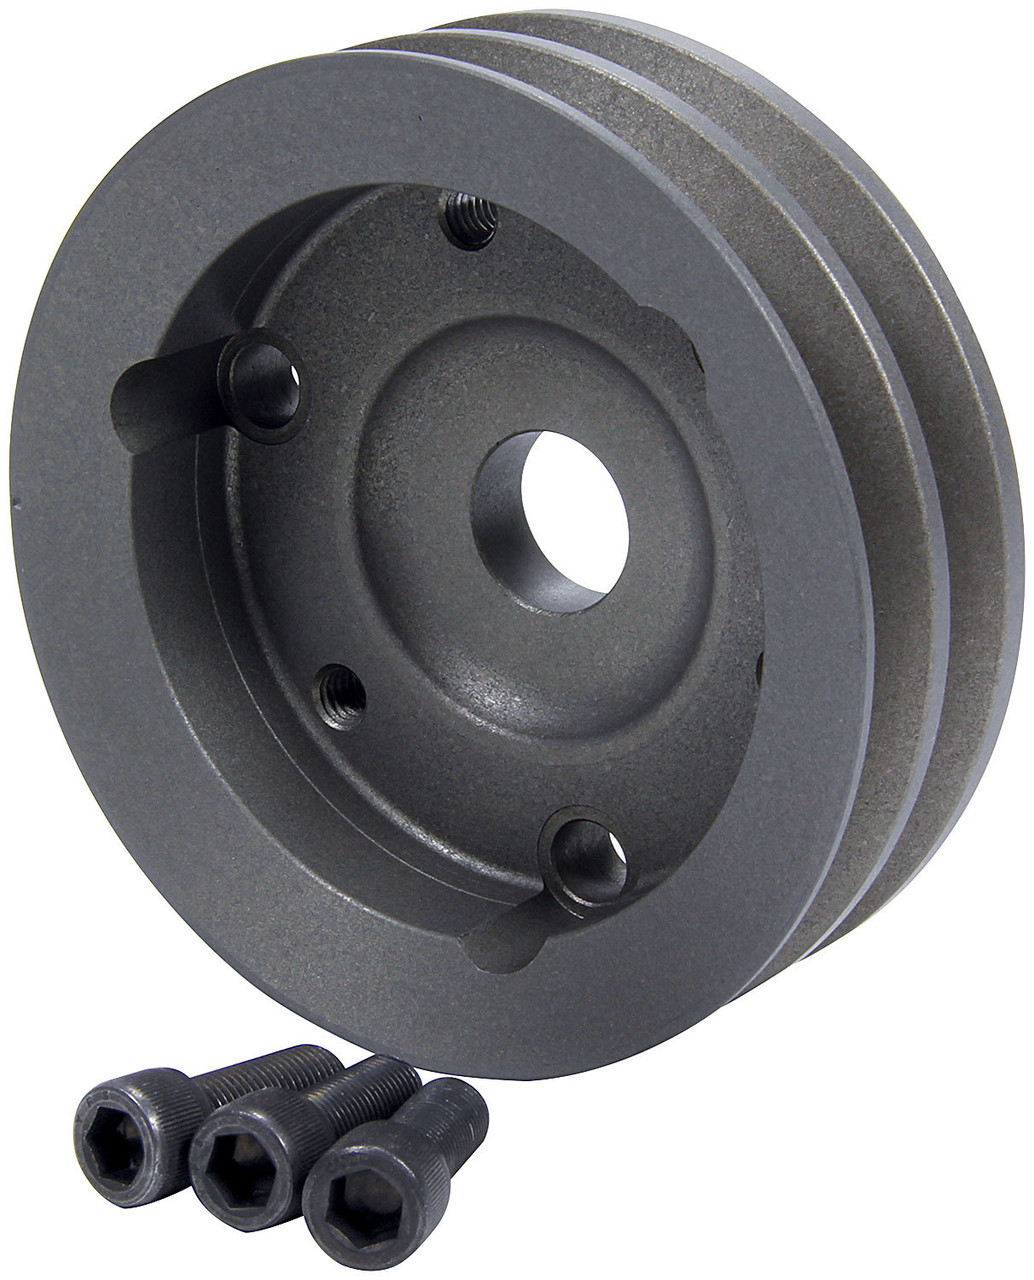 This pulley is designed for use with 1/2 Industrial style, belts such as the following.ALL86127 29 WP to Crank ALL86128 37 WP to Crank to PS w/Block mount ALL86129 41 WP to Crank to PS w/Head mount